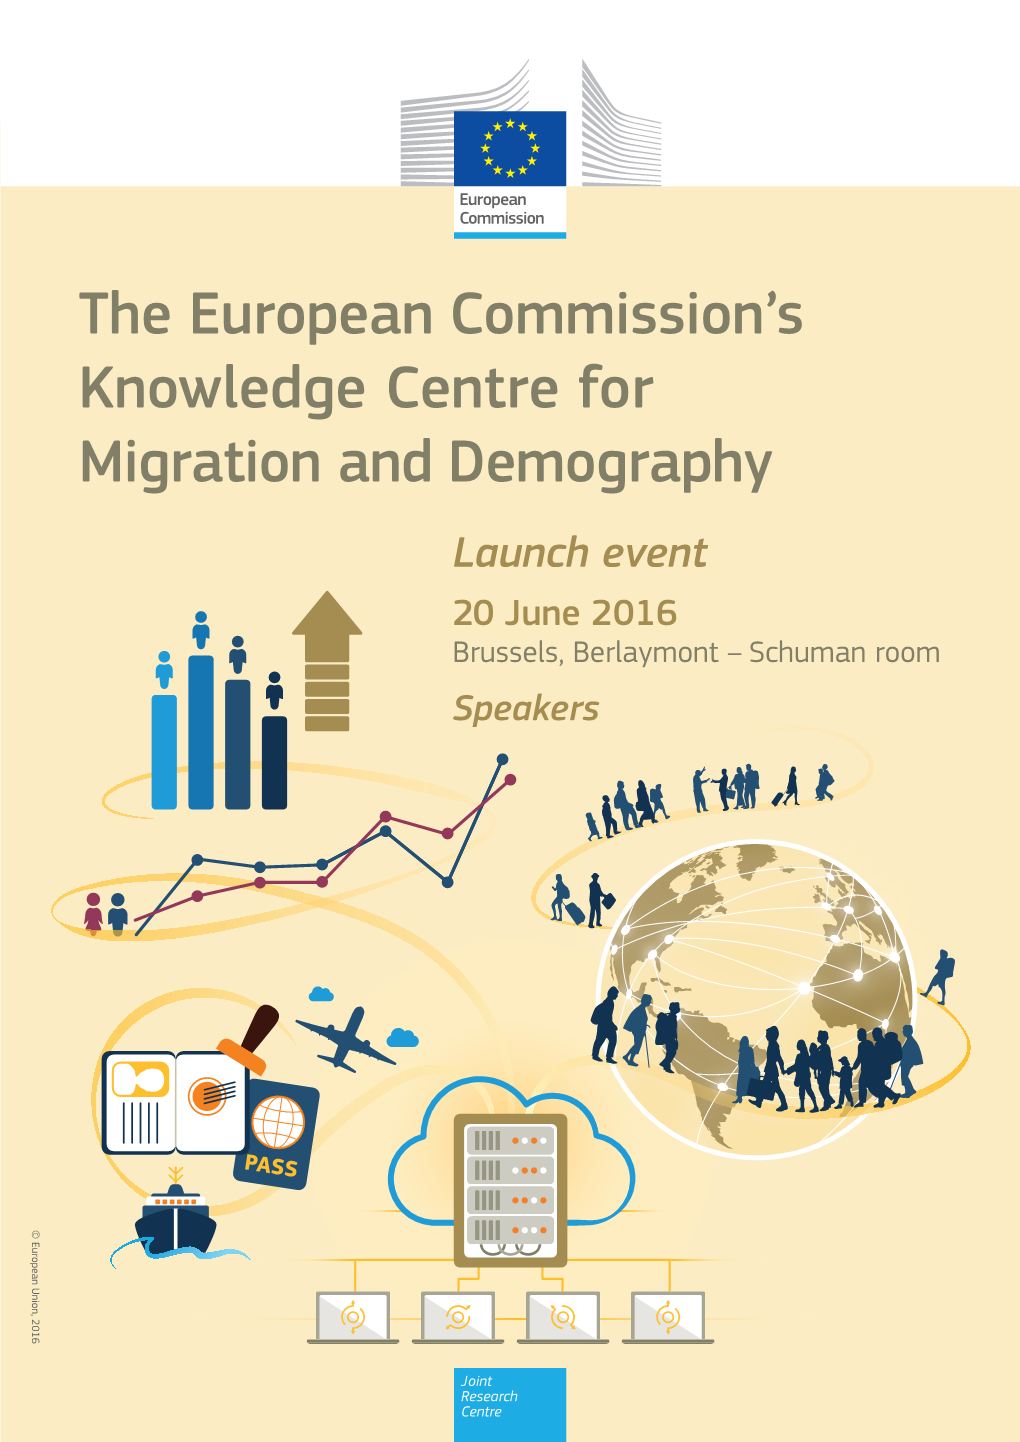 The European Commission's Knowledge Centre for Migration